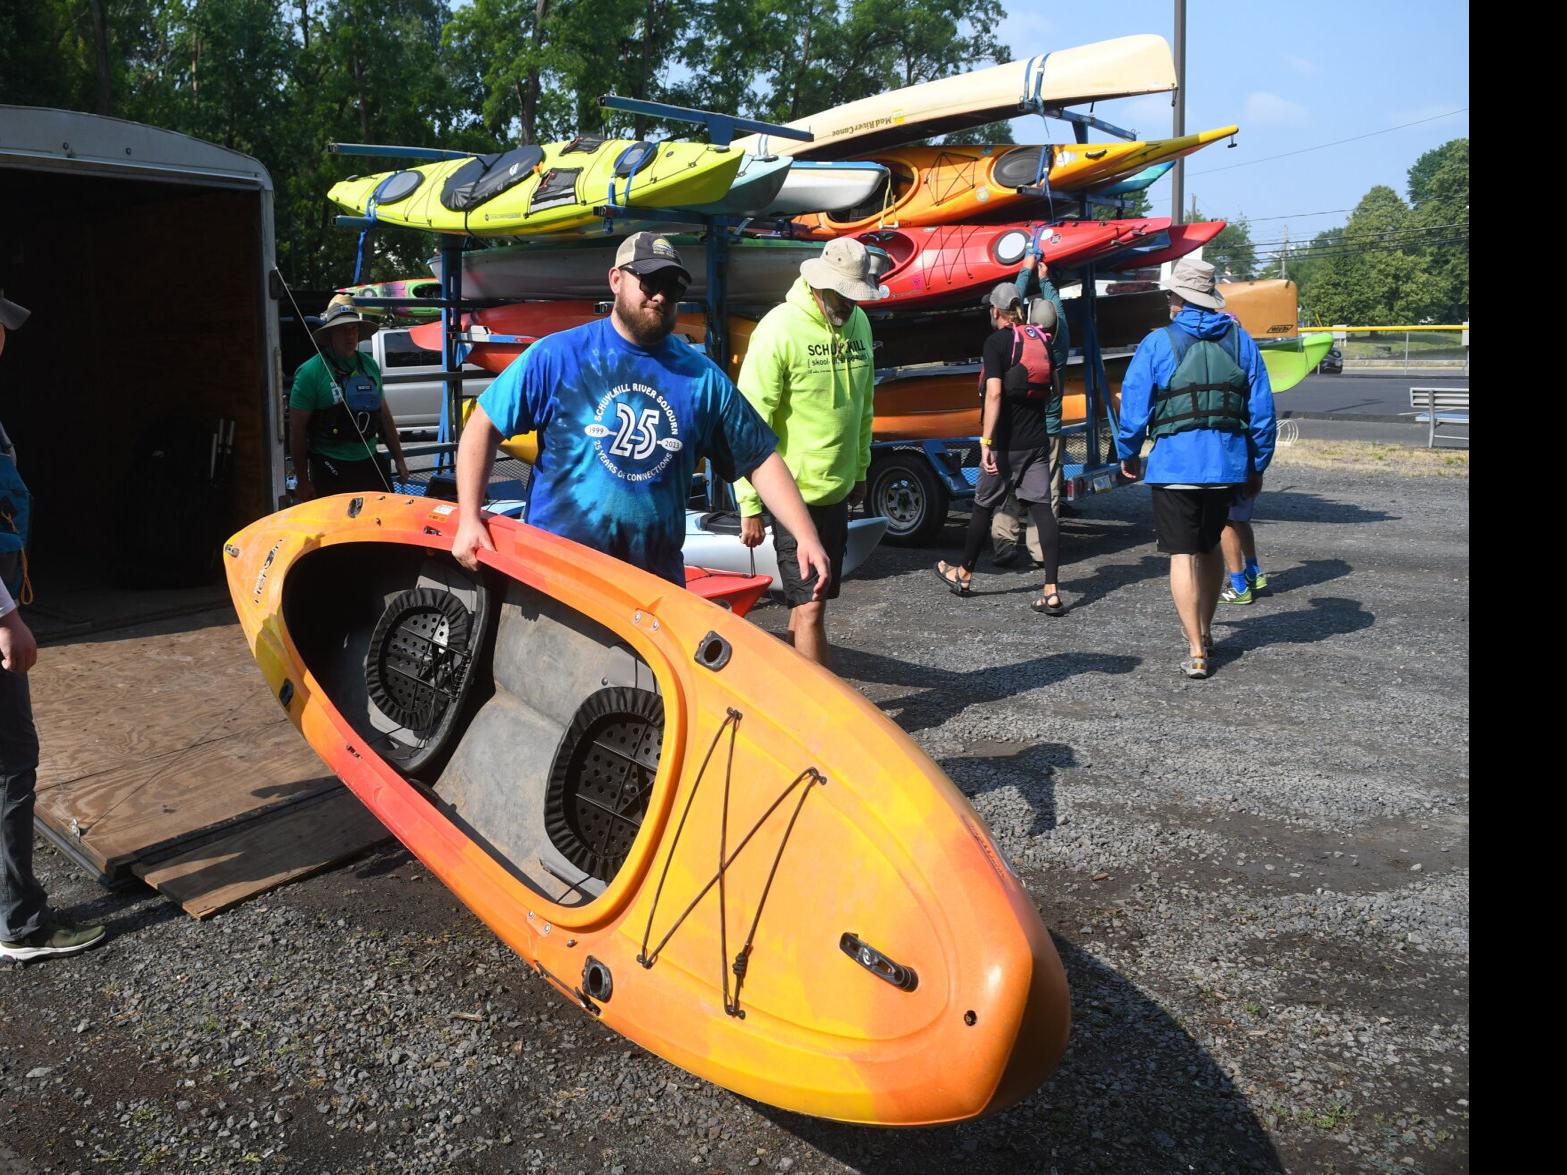 Schuylkill River Sojourn starts a little different for 25th edition, News